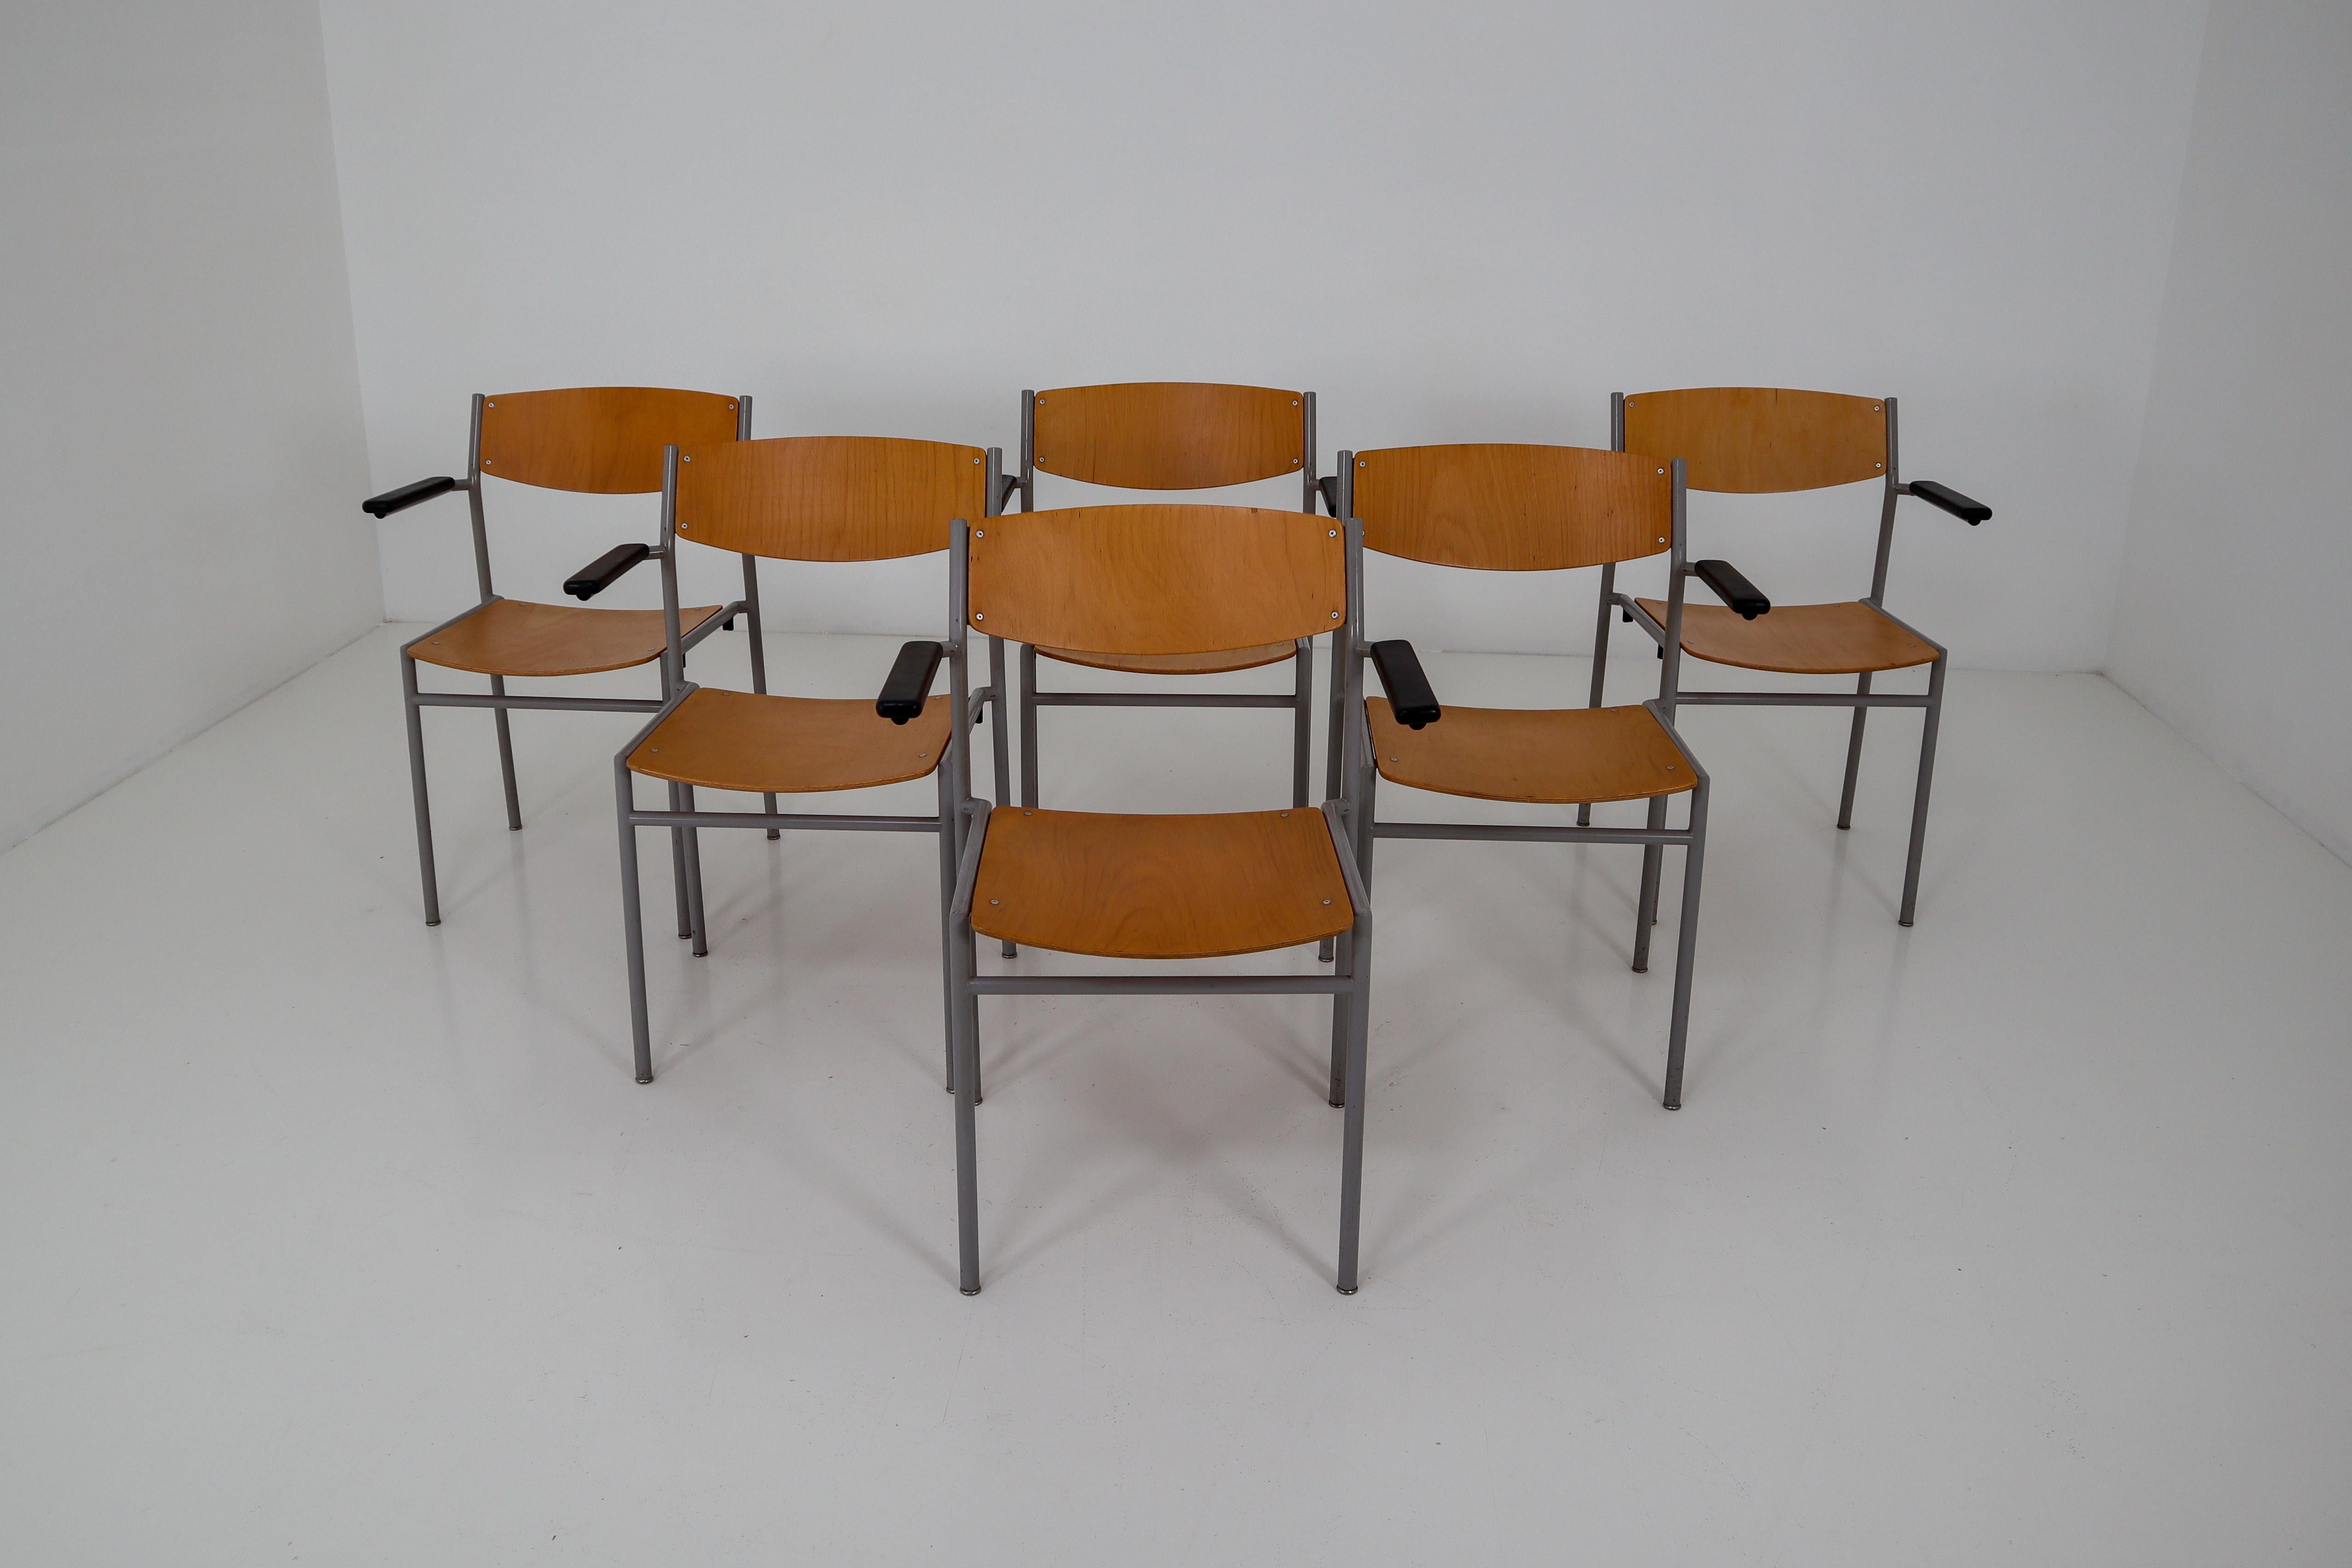 Gijs Van Der Sluis The Netherlands. Minimal use of material. Lounge chairs or meeting chairs. The sitting and back are of blond painted plywood.